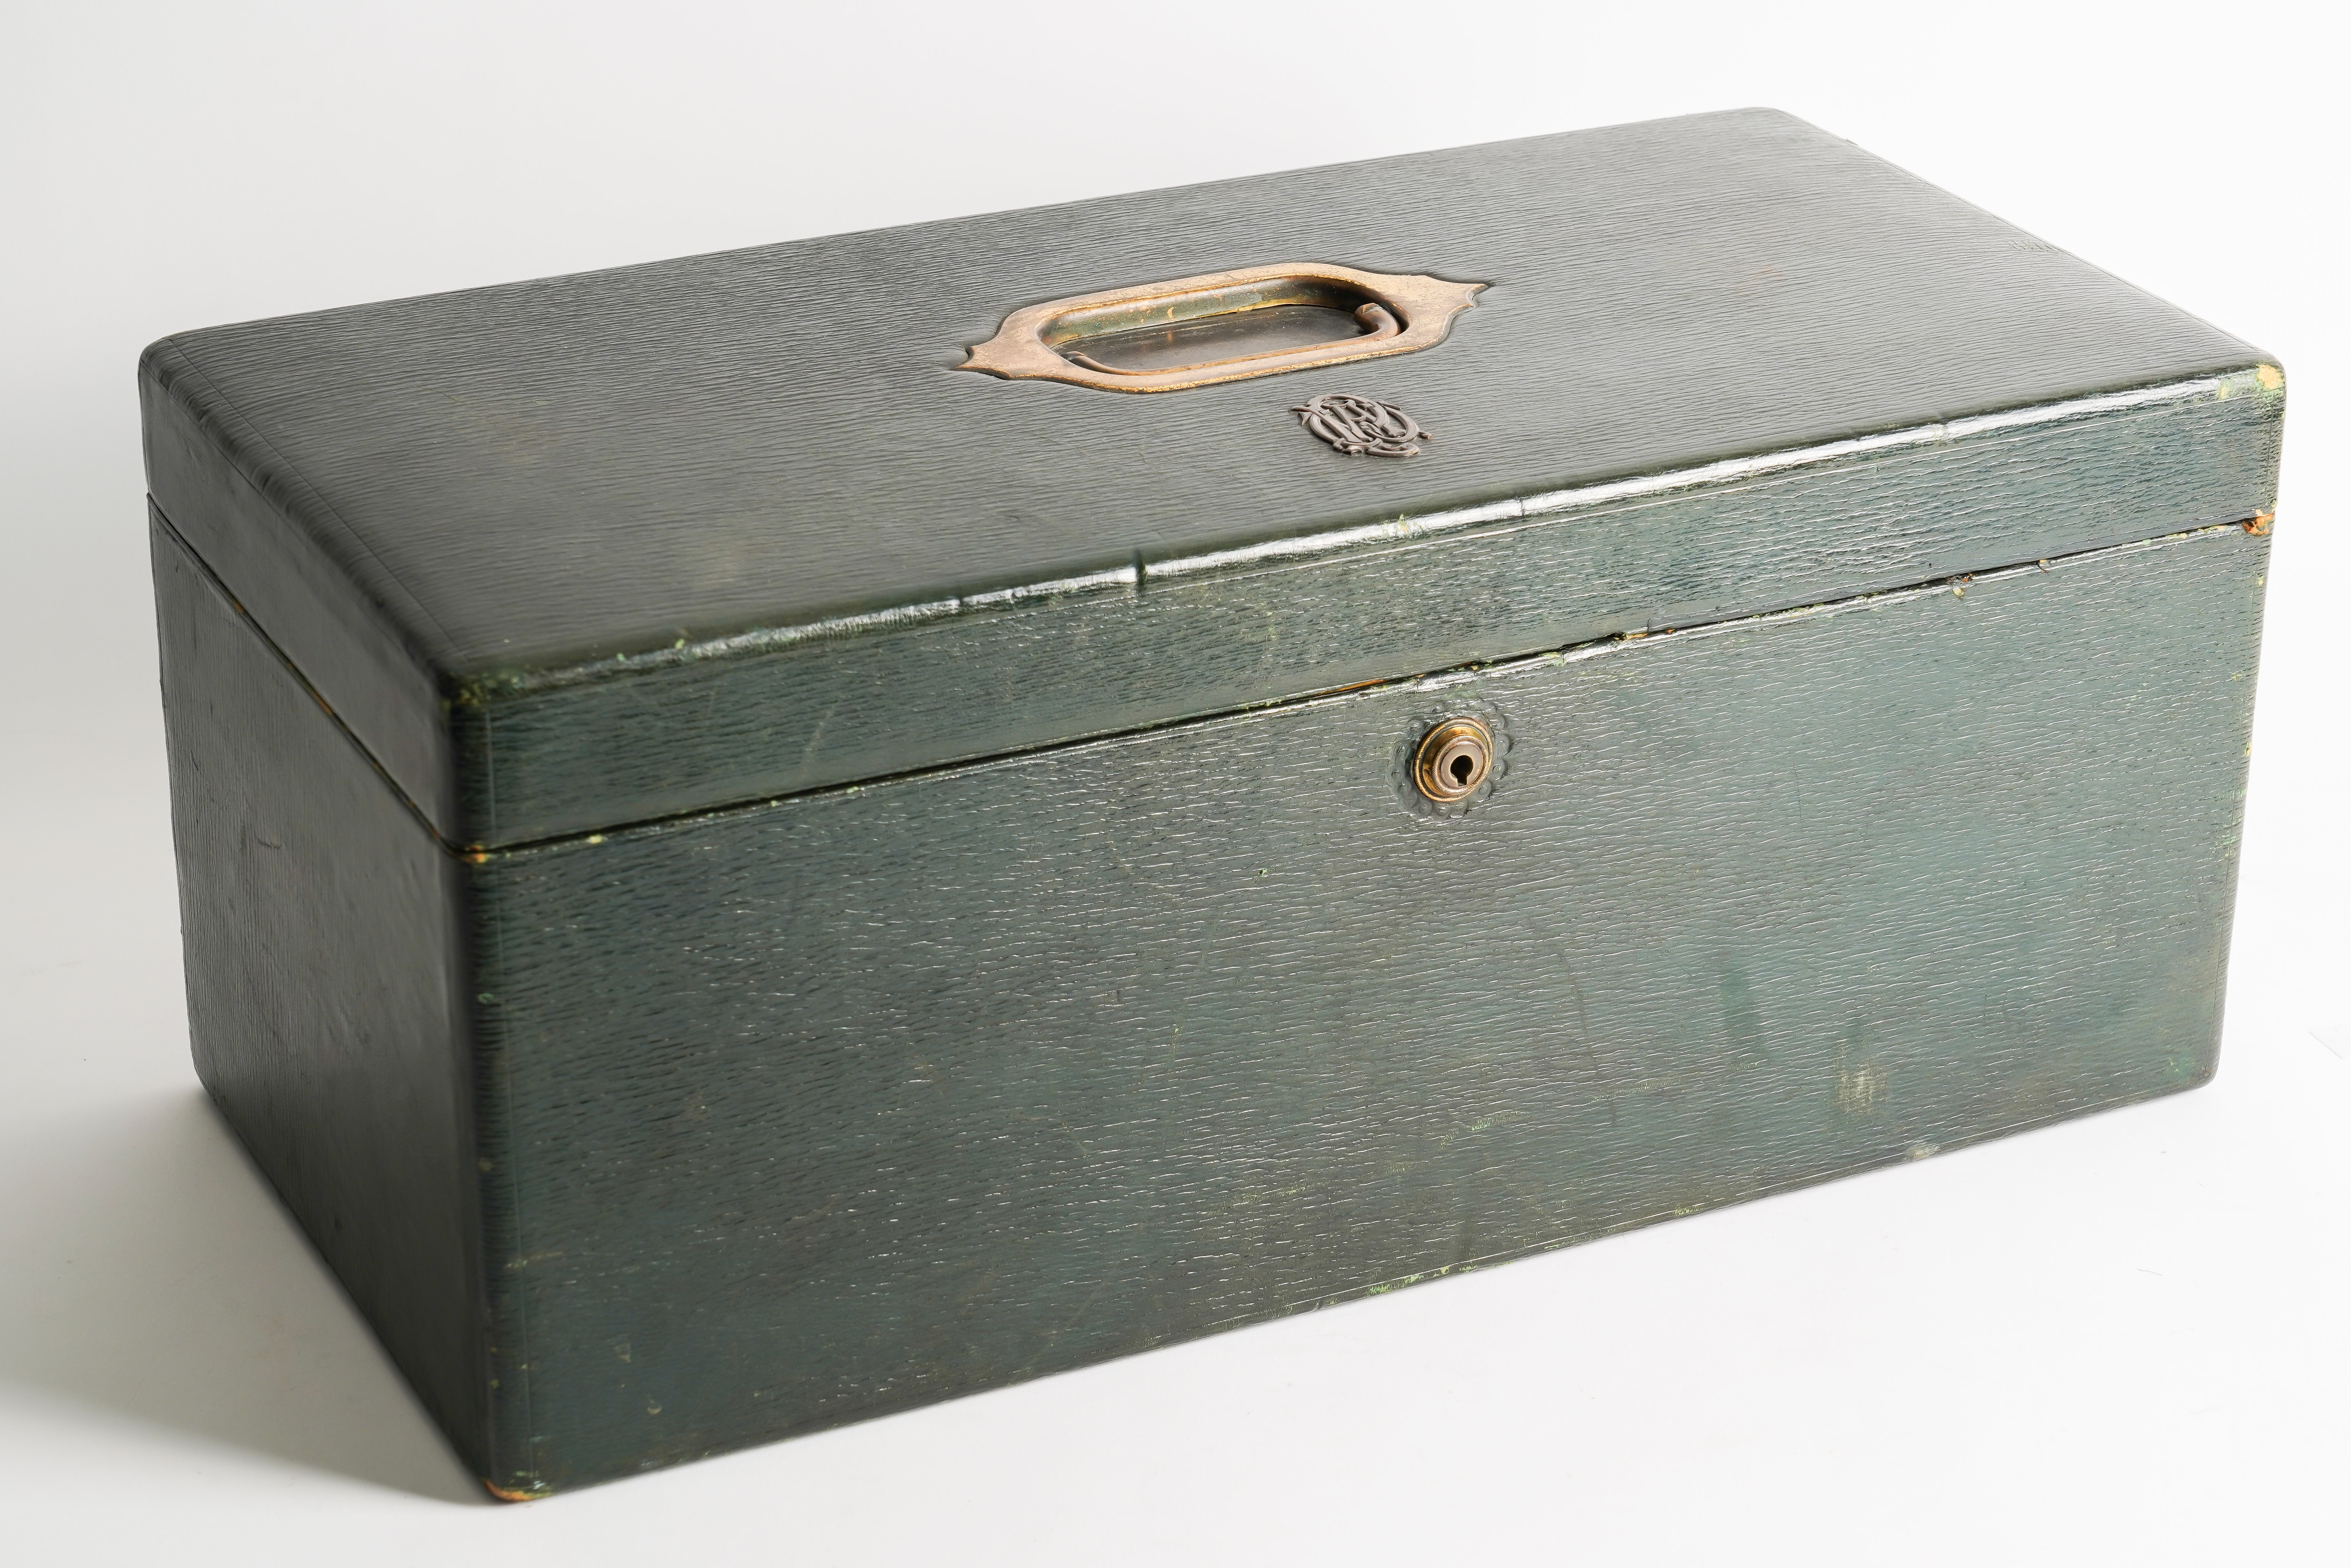 A LARGE 19TH CENTURY GREEN MOROCCO LEATHER JEWELLERY CASE